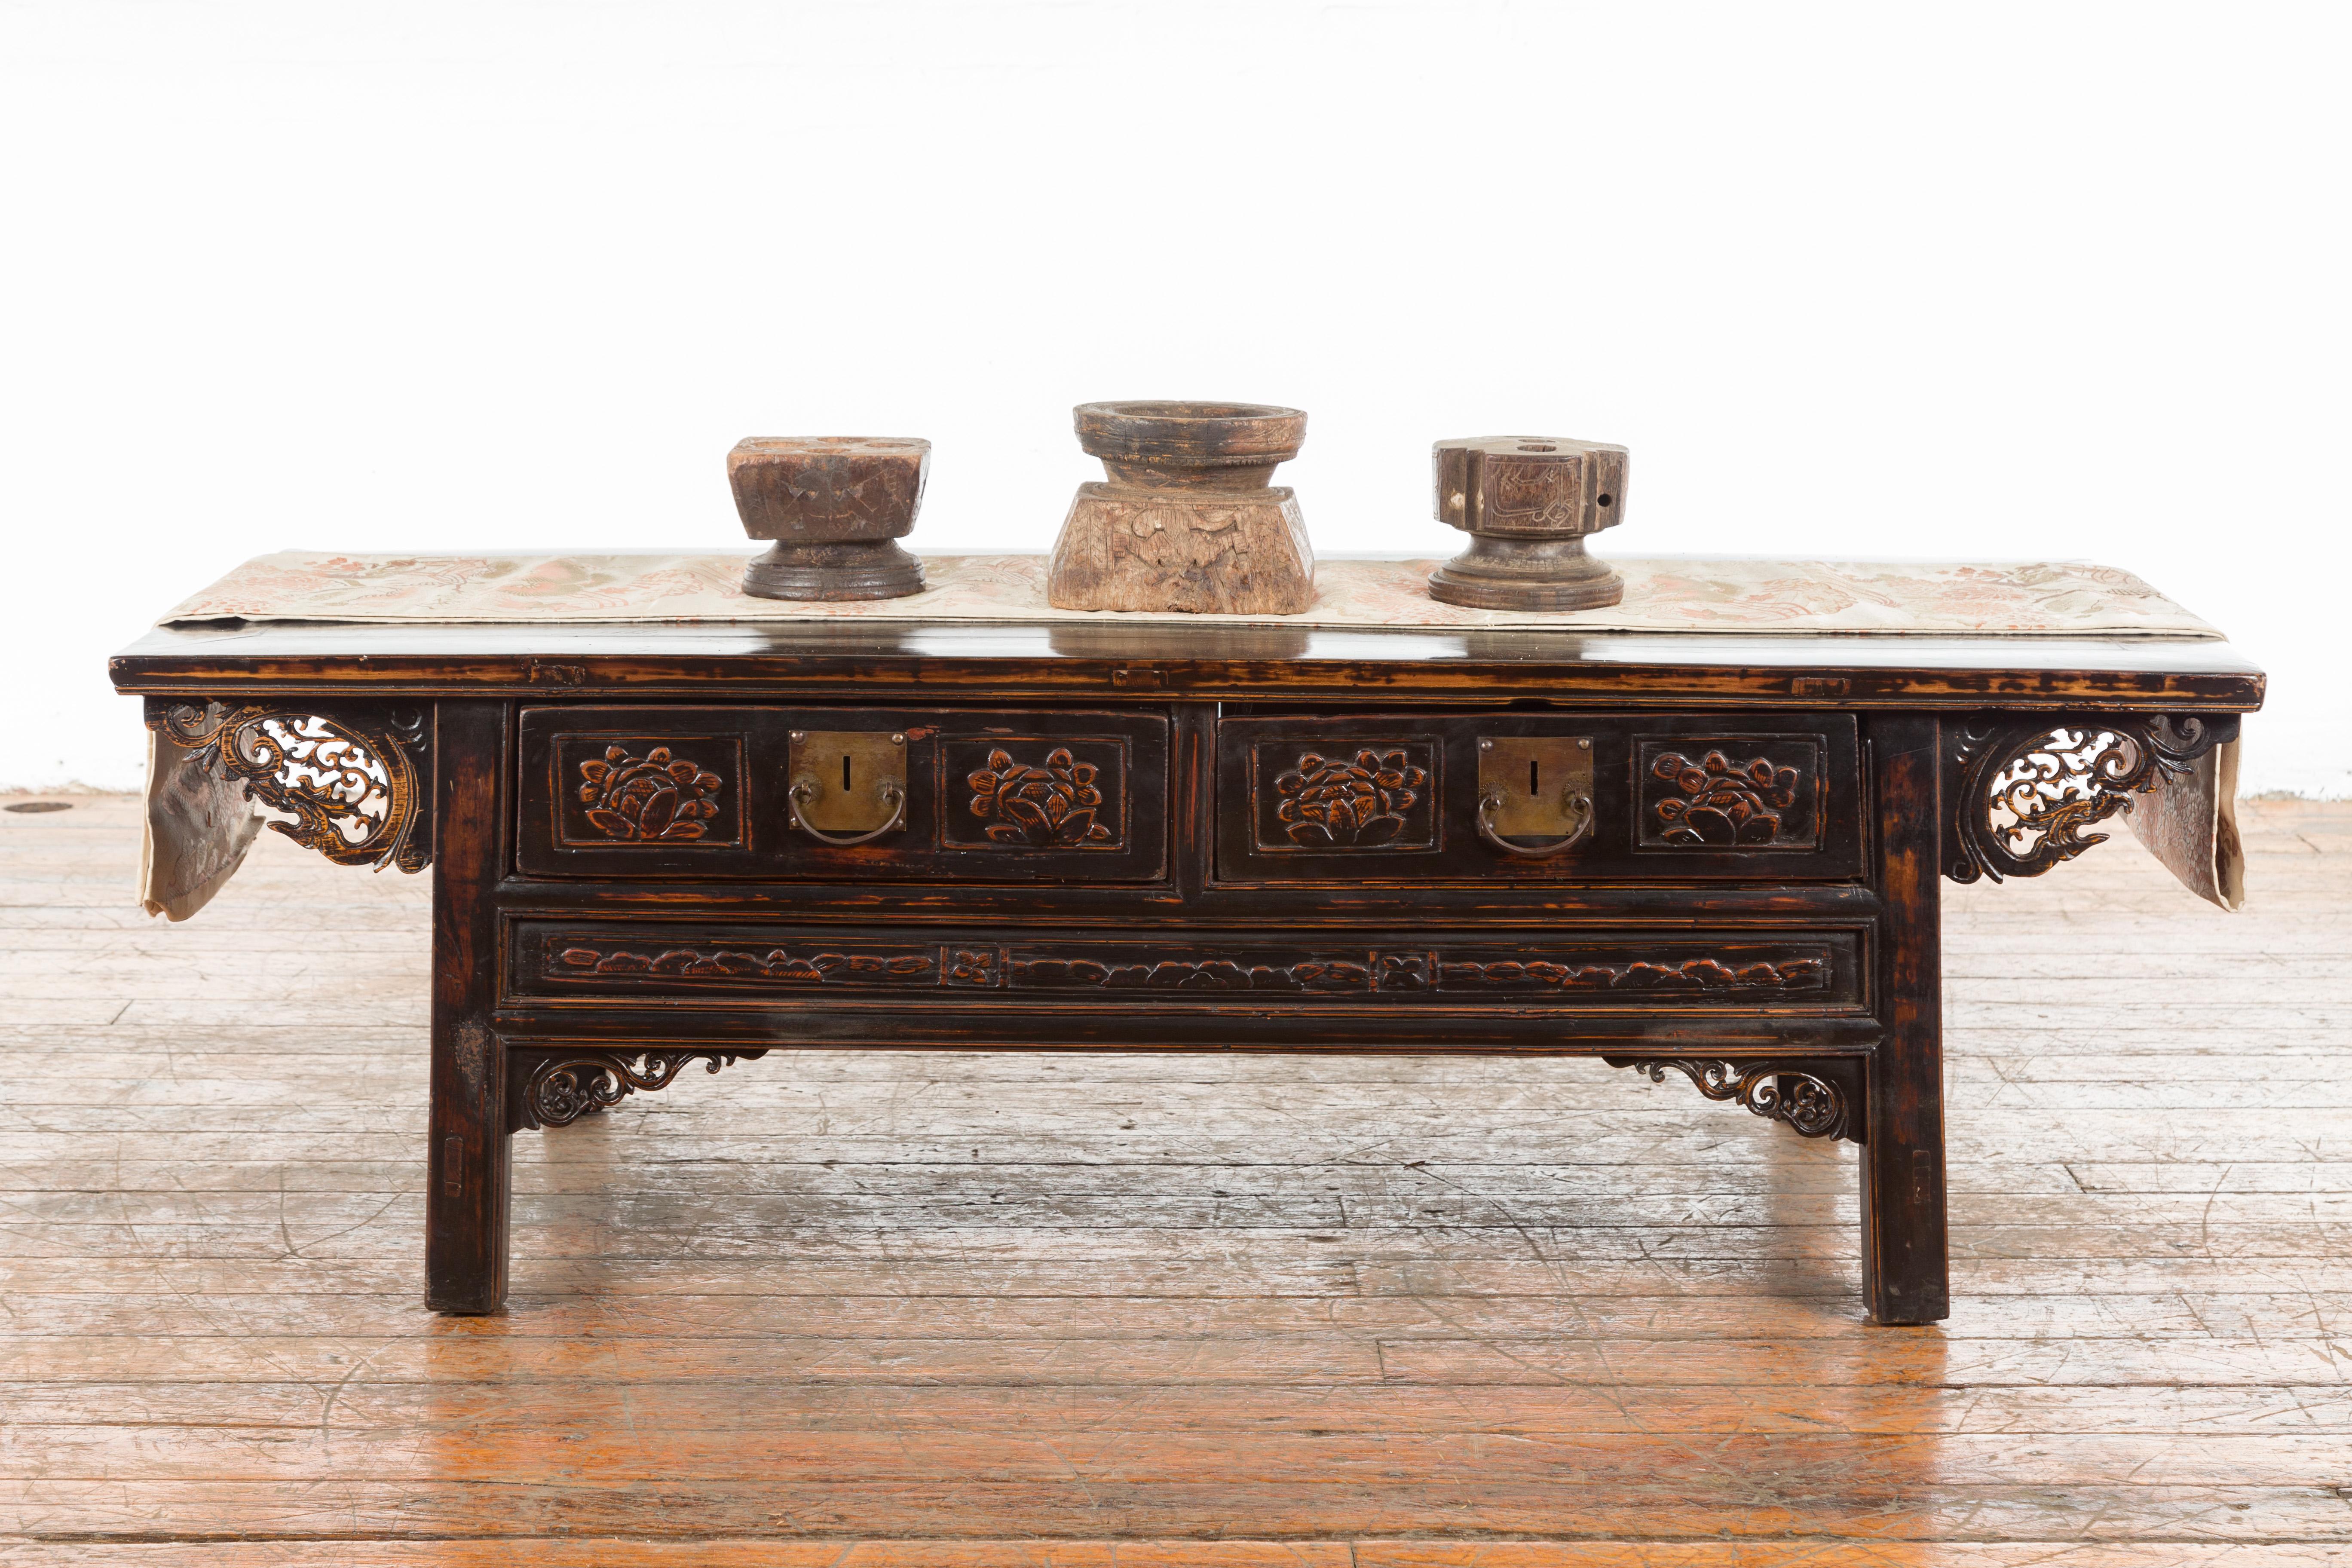 A set of three Indian seed planters from the 19th century, with distressed patina. Created in India during the 19th century, these wooden pieces were originally used for planting seeds. Boasting a nicely weathered appearance, each piece features a